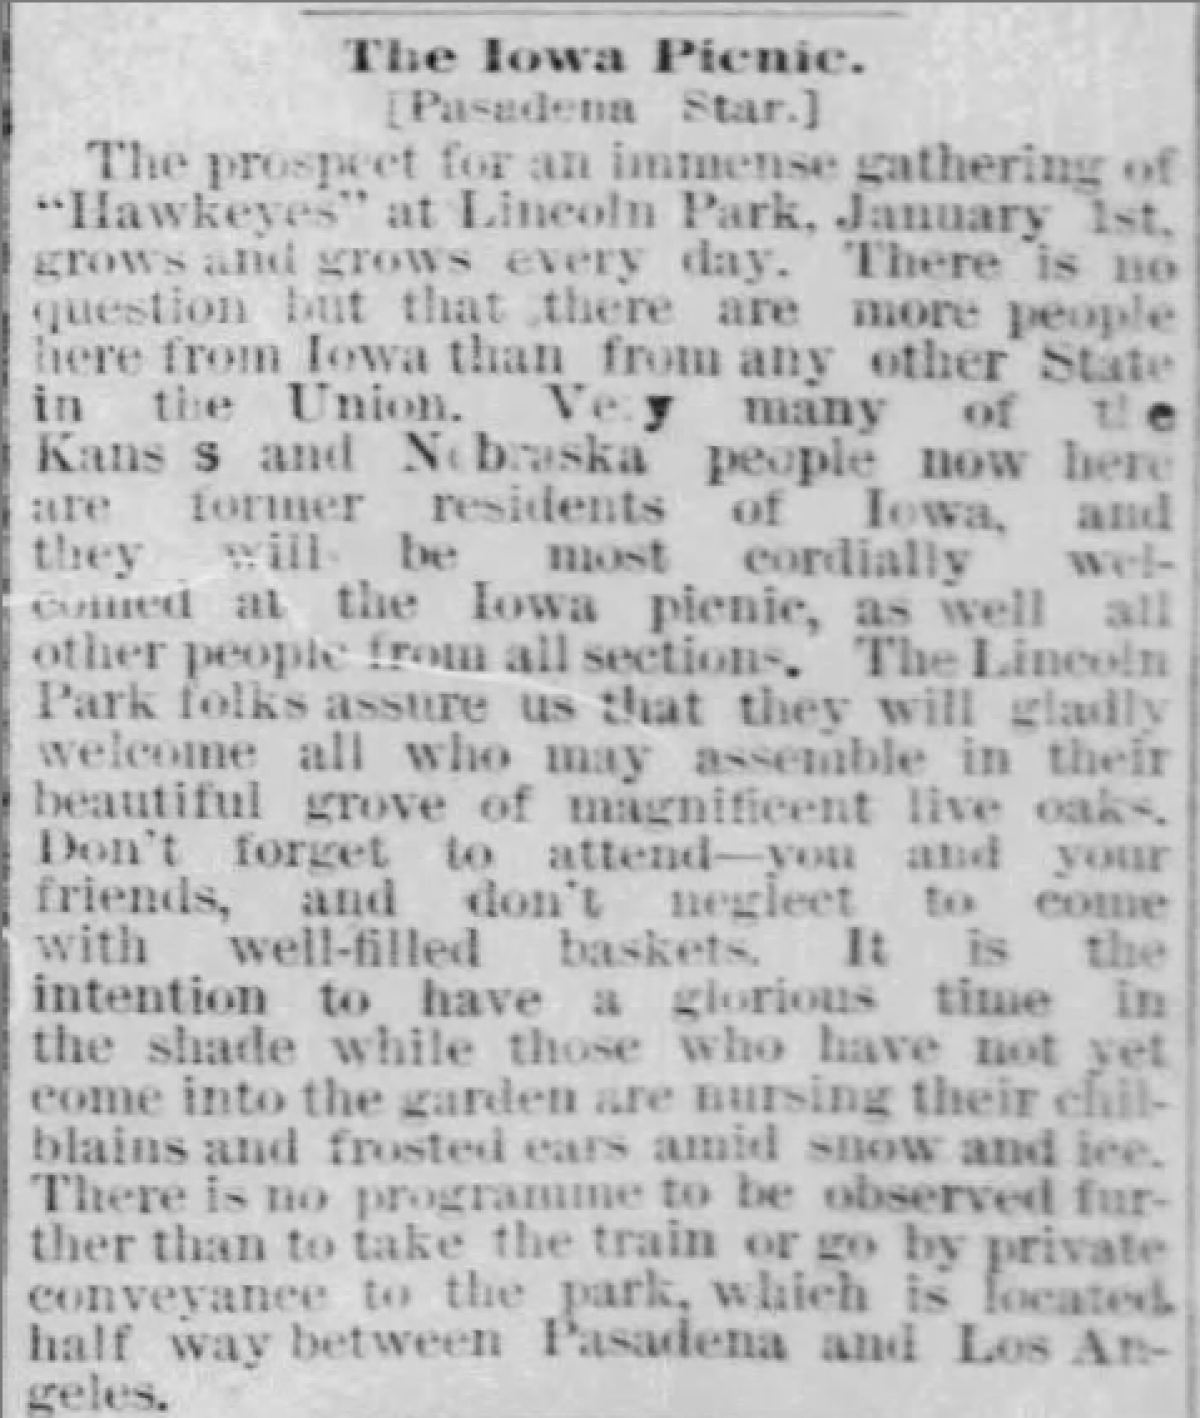 Dec. 24, 1886, Los Angeles Times preview of the first Iowa Picnic.